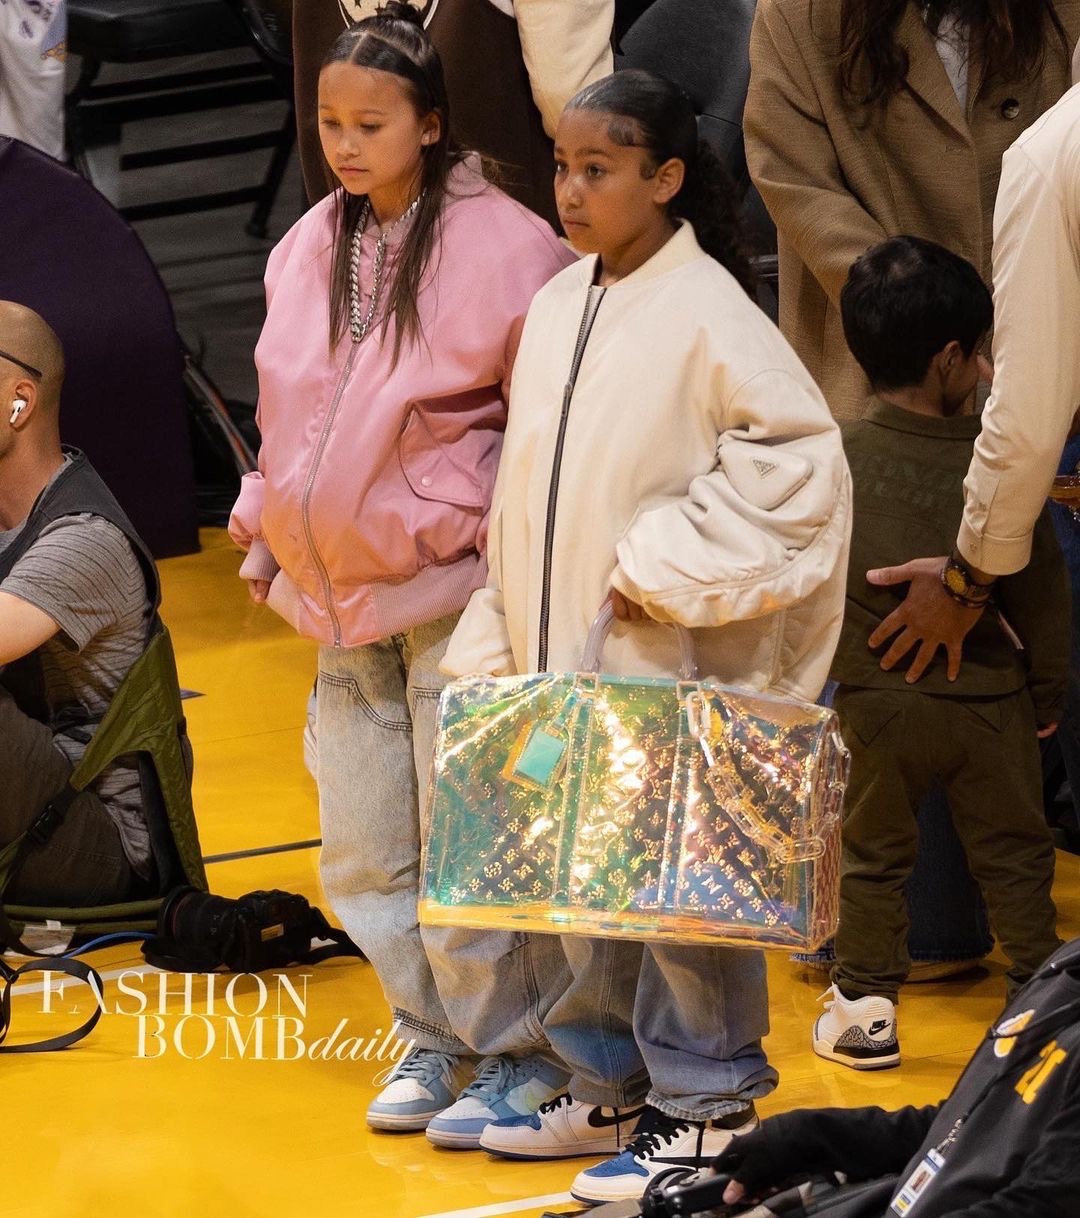 North West Attended the Lakers Game in an Off White Prada Bomber